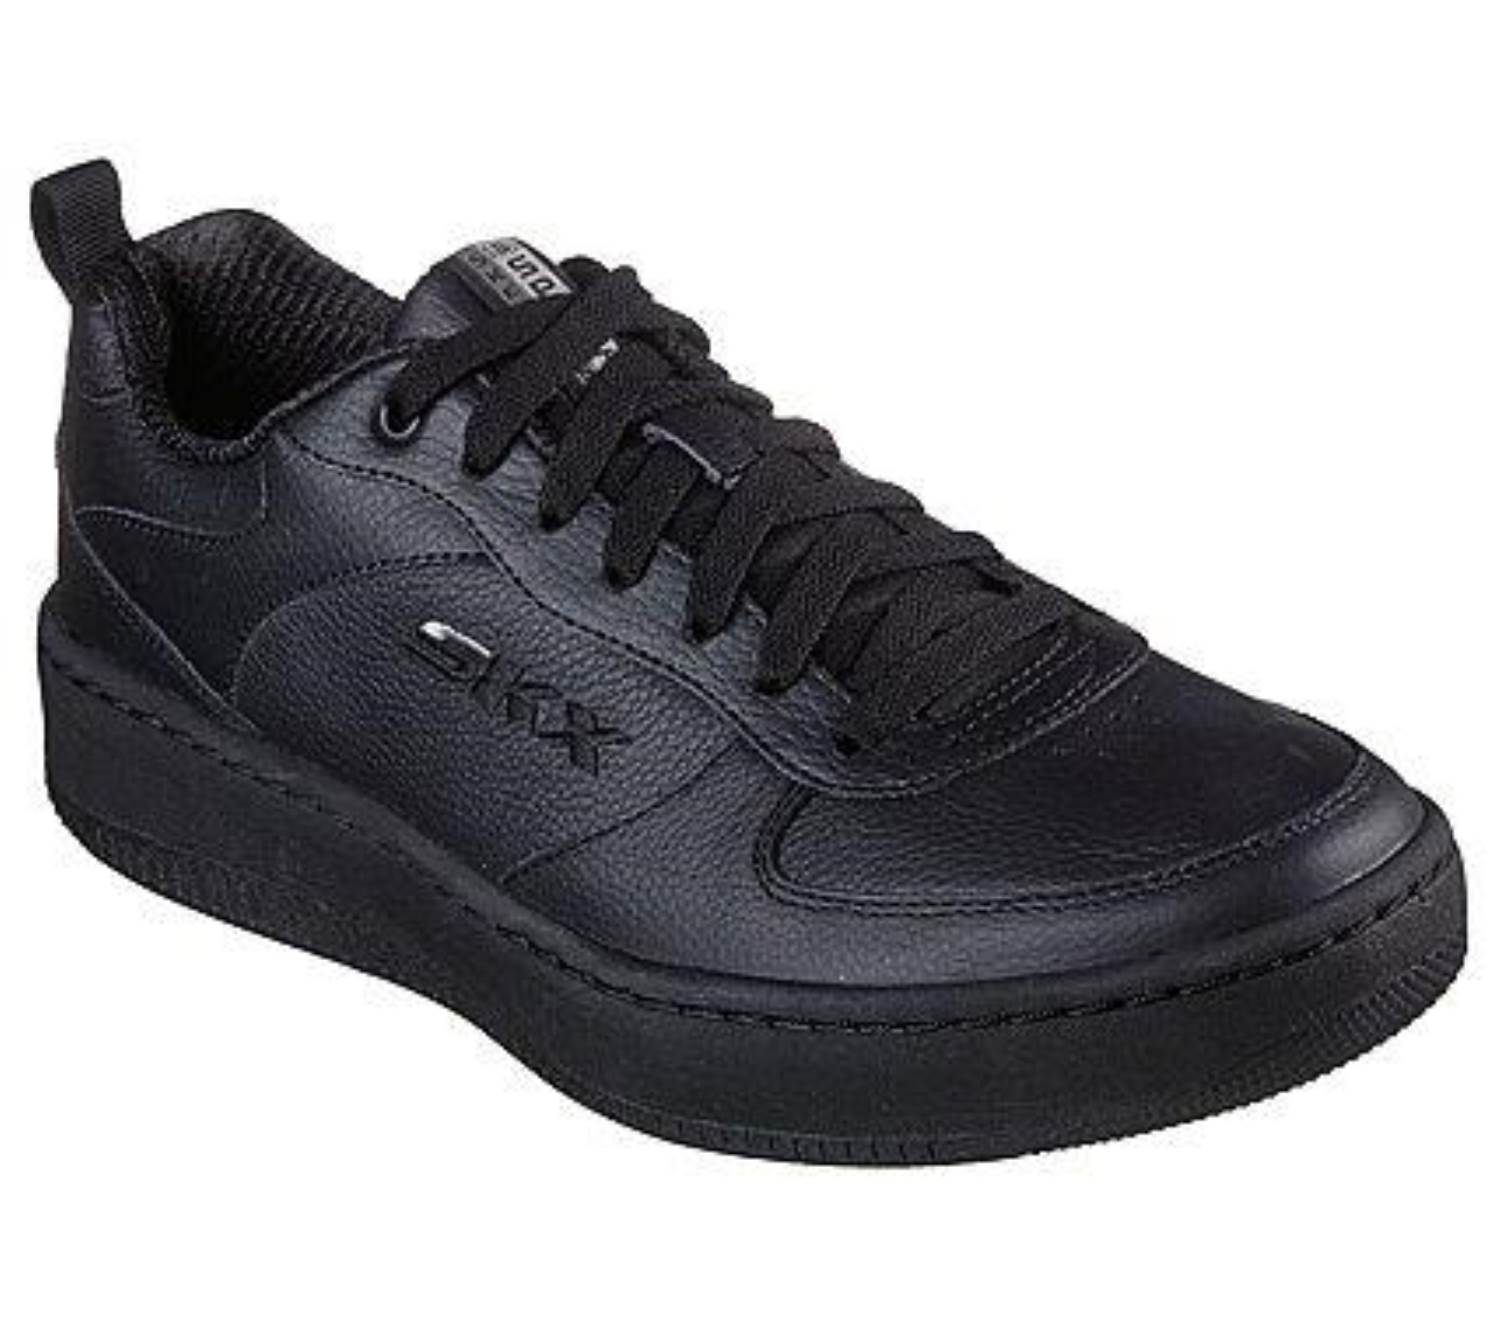 Shop Men's Shoes - Best Price at DICK'S